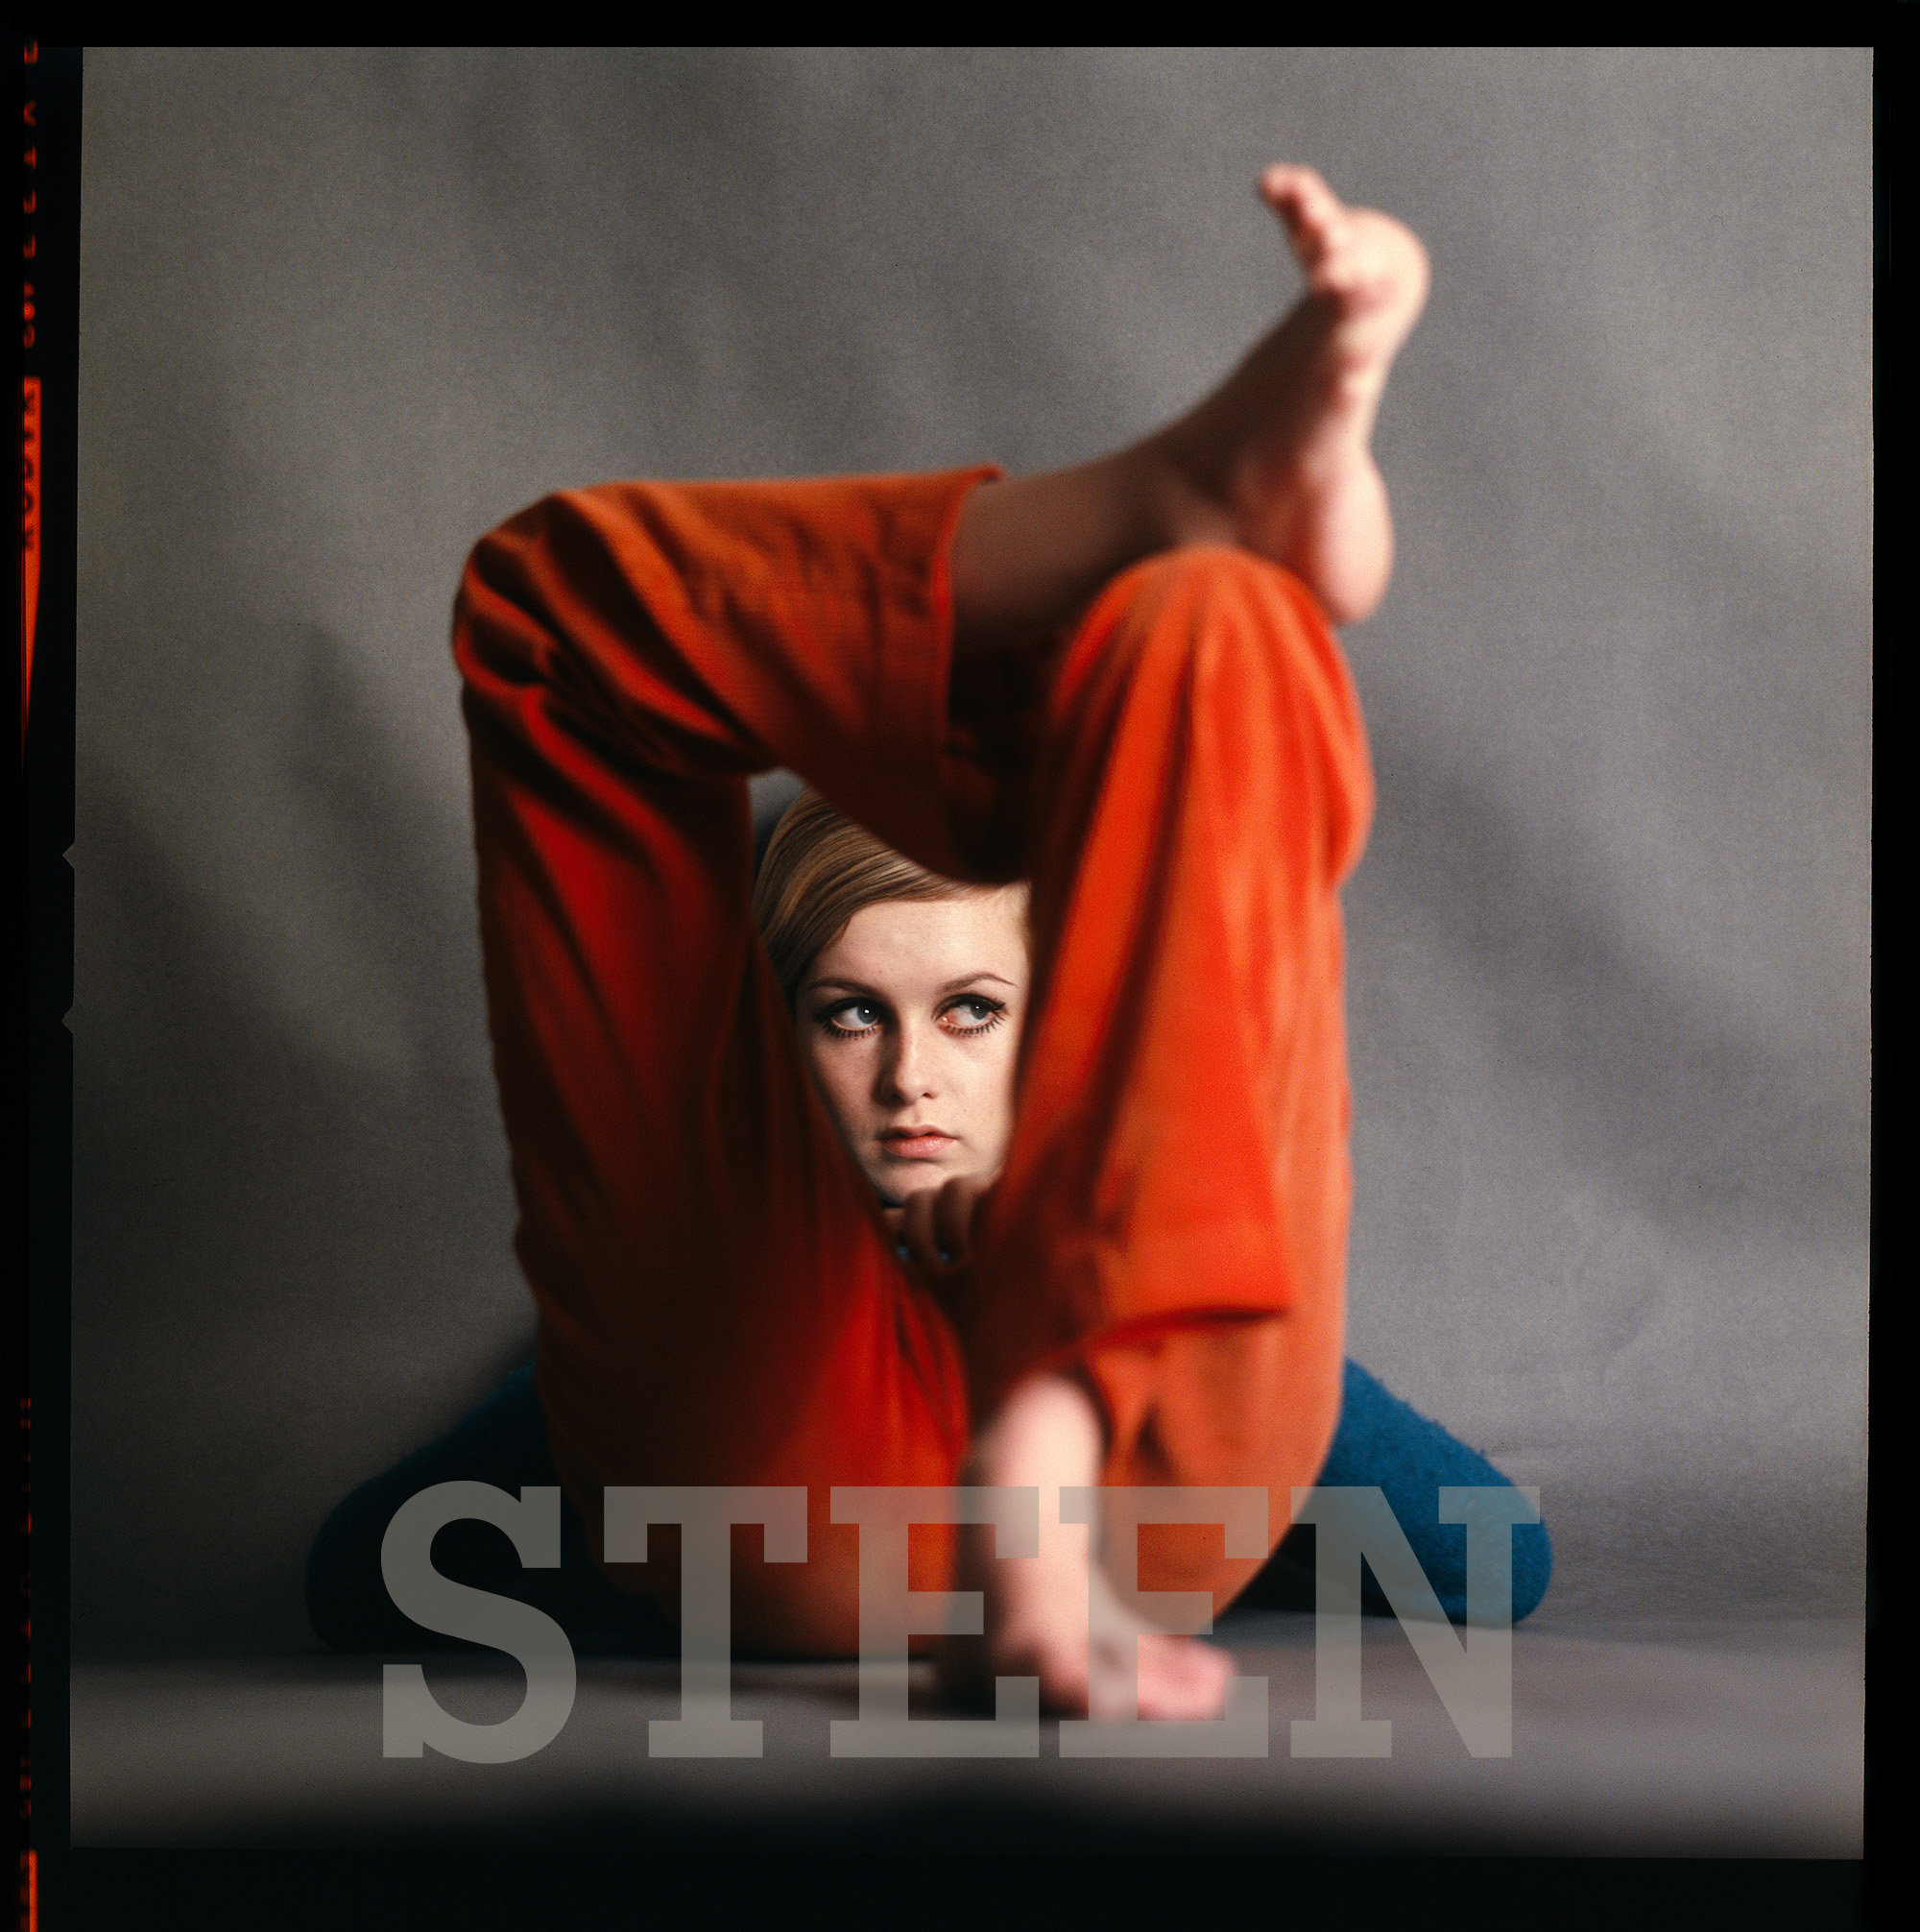 an exclusive limited edition photograph of twiggy by david steen